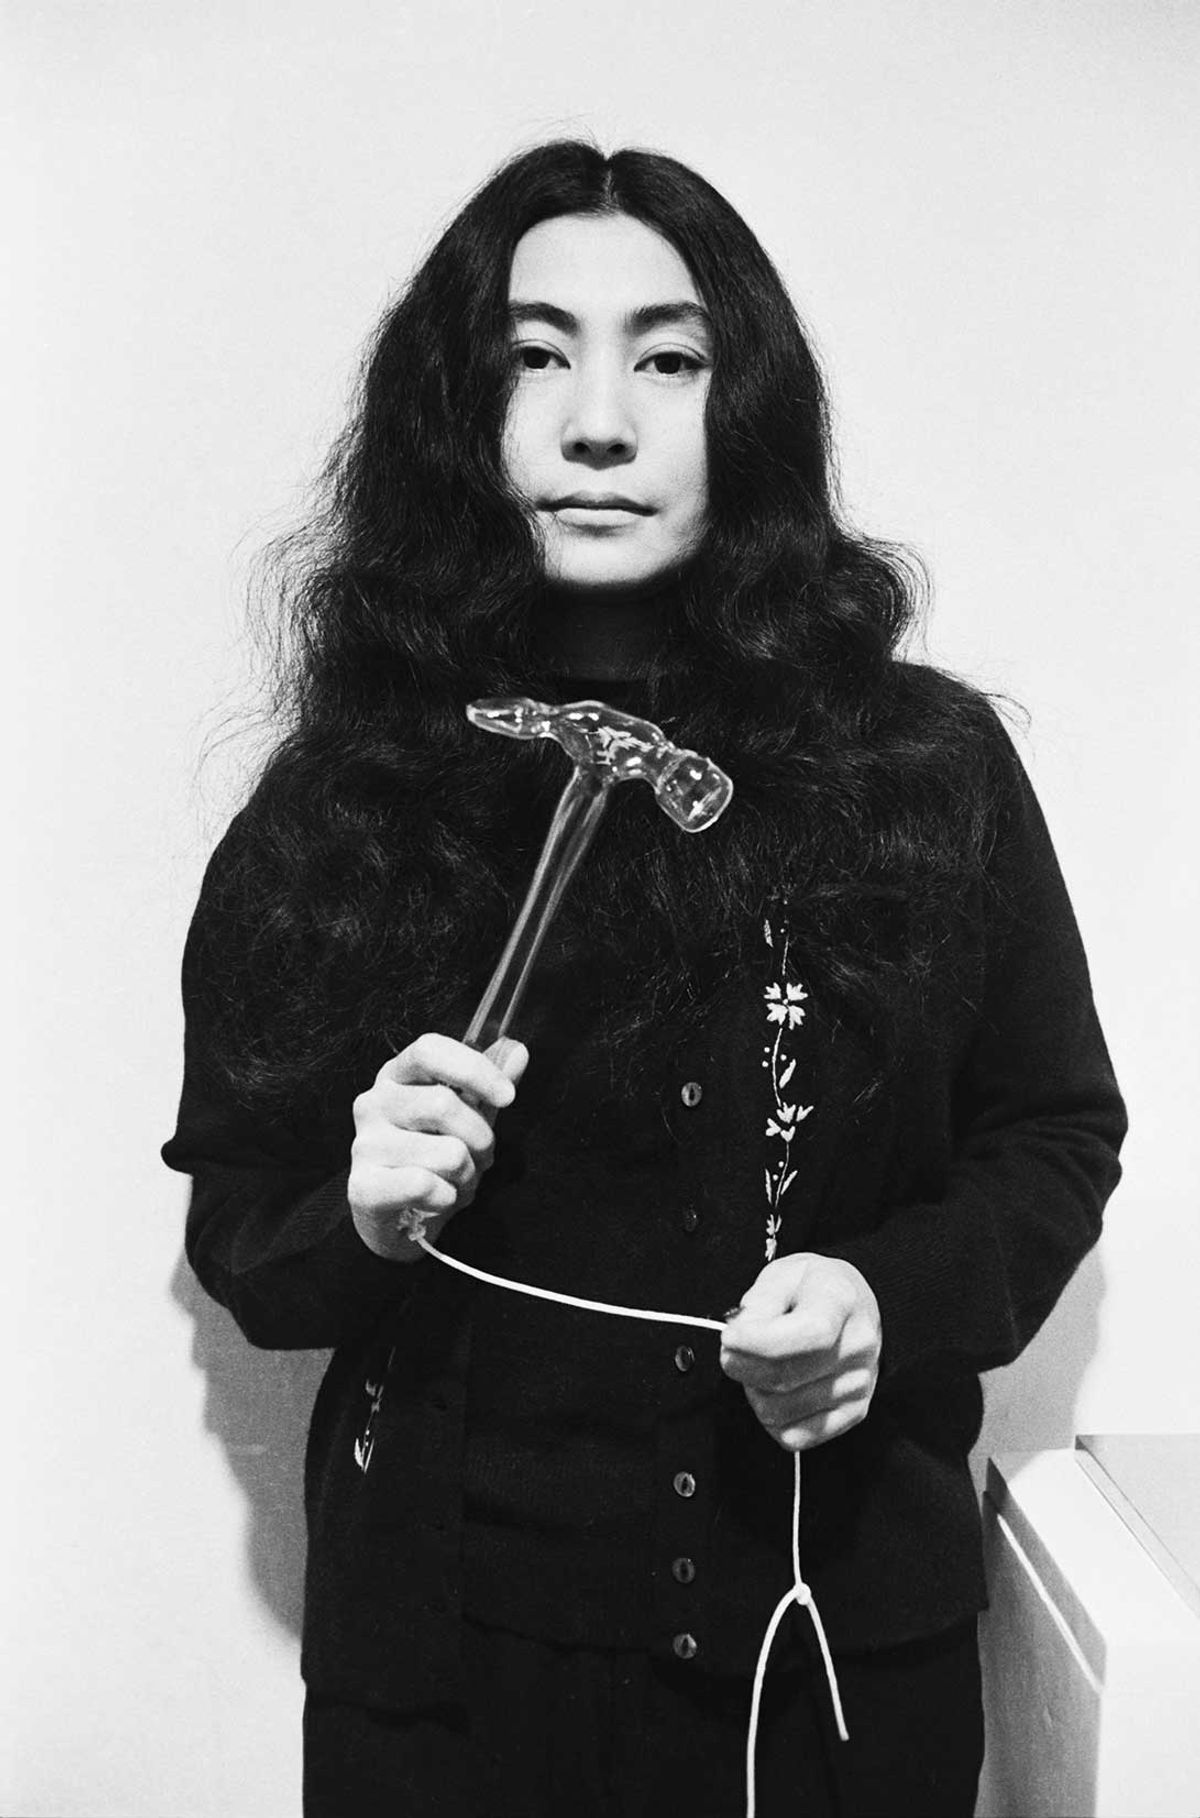 Yoko Ono photographed in 1967 during her Half-a-Wind show at London's Lisson Gallery

Photo © Clay Perry


